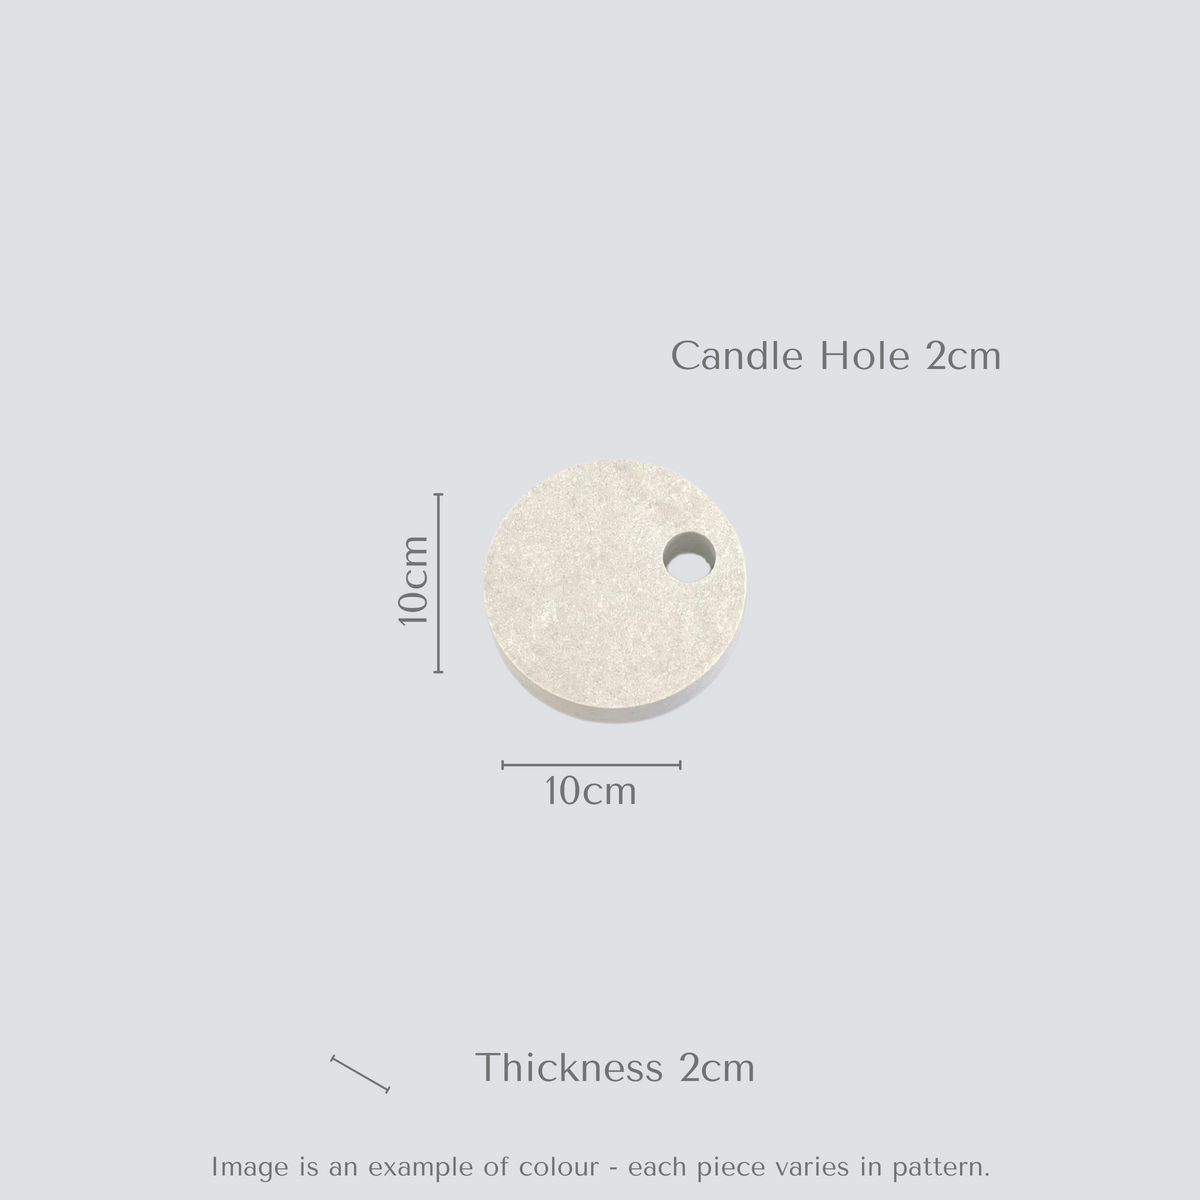 Quartz Round Single Candle Holder in Caesarstone Airy Concrete created by Aureliia Collection. Close up image showing this candle holder has a feel of concrete in full movement. Measurements shown. The perfect home decor item.